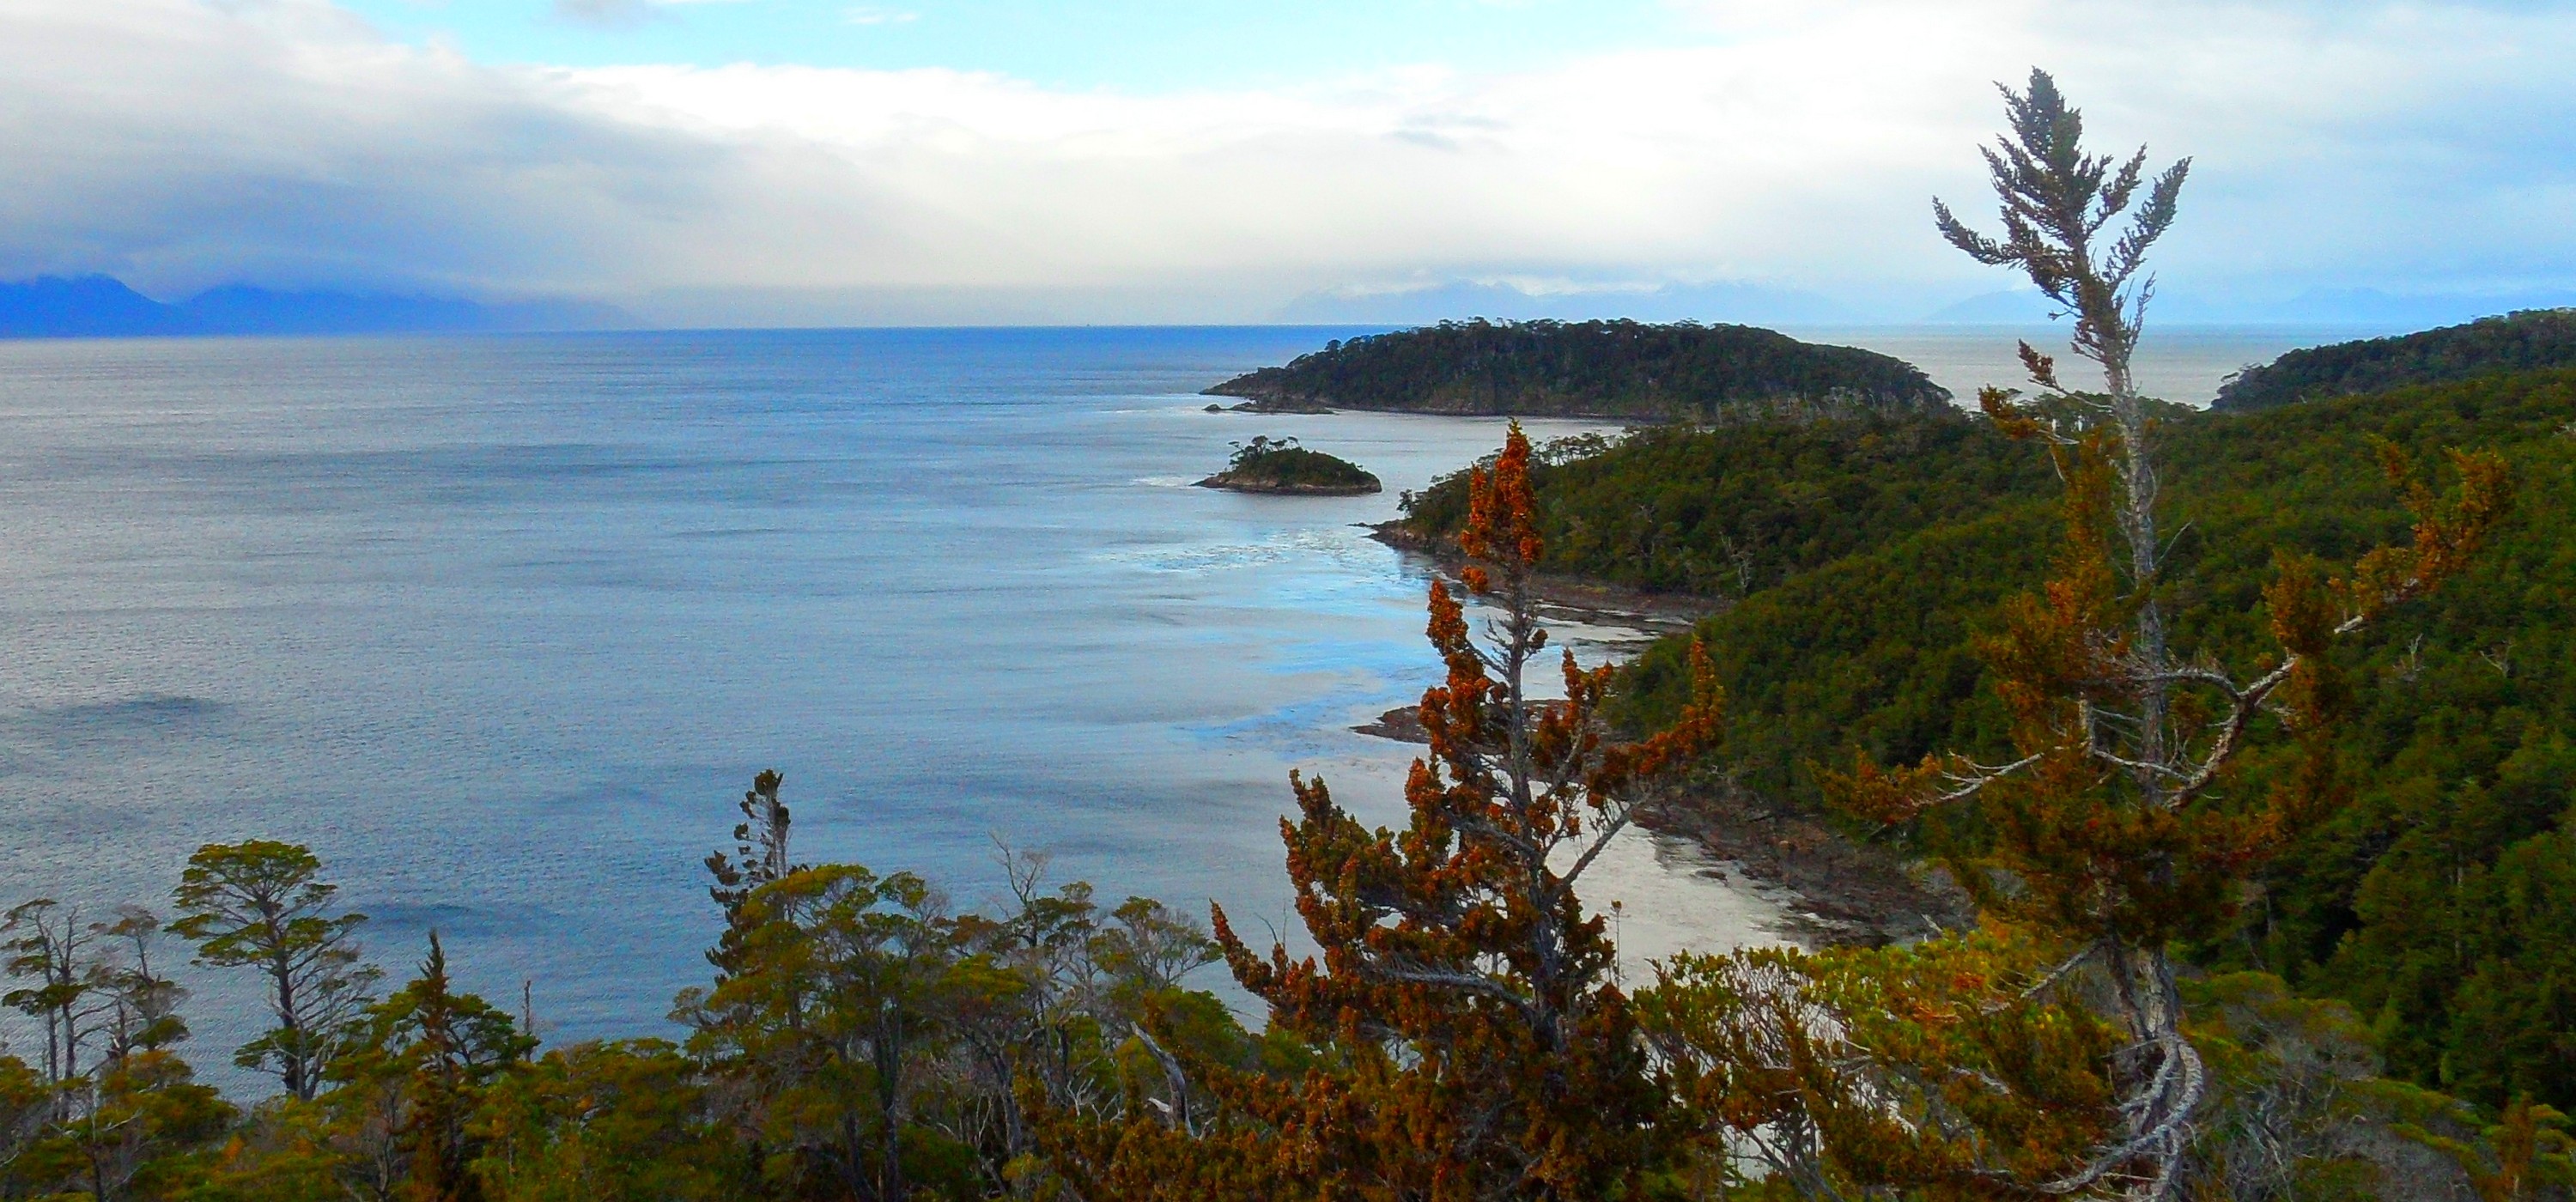 Nature Landscape Photography Peninsula Island Forest Hills Sea Trees Clouds Beach Patagonia Chile 3000x1400